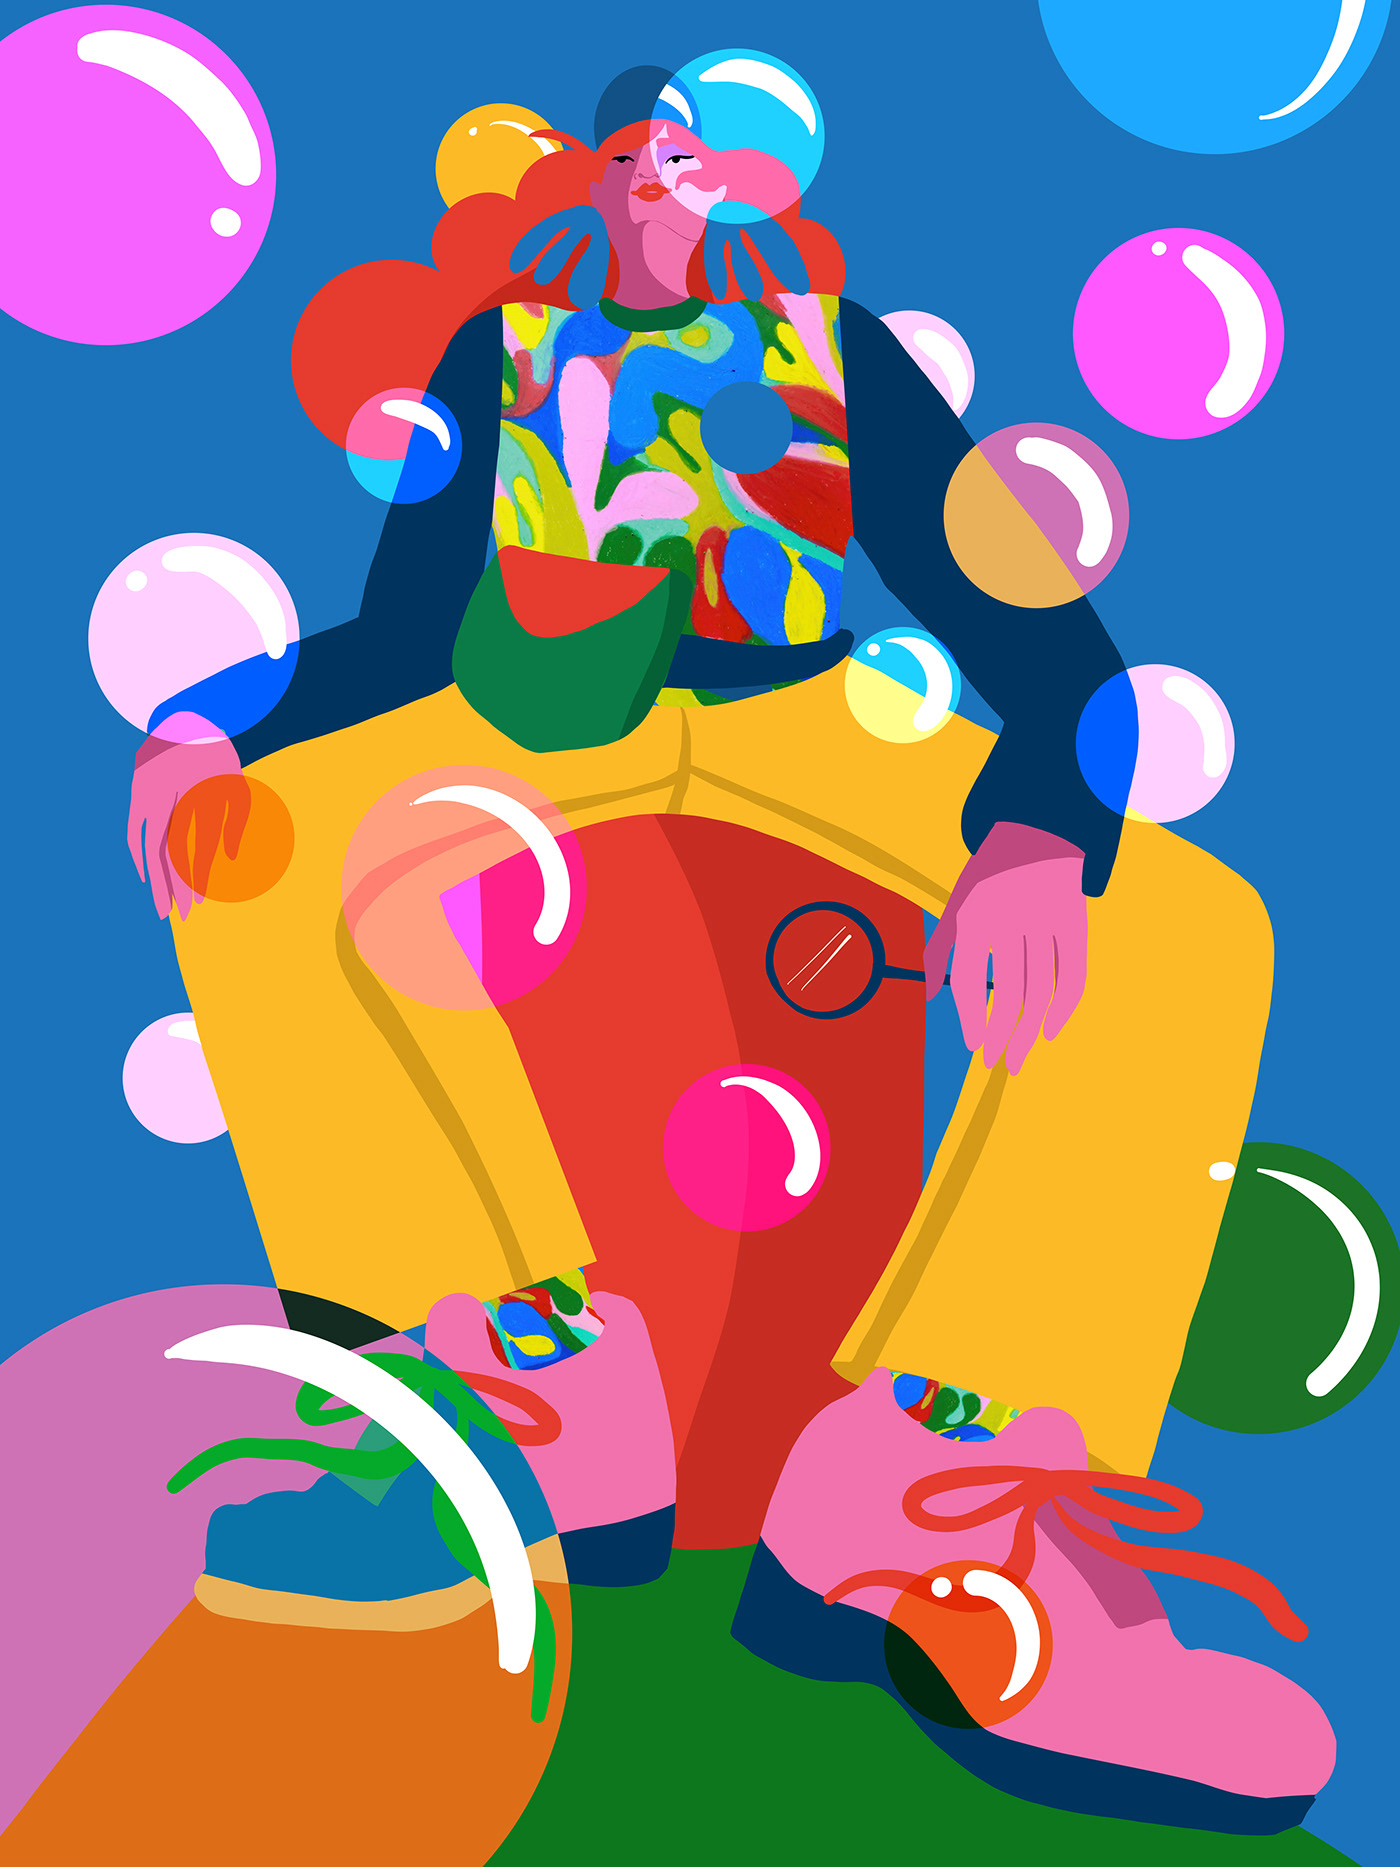 woman with long red hair and a colorful outfit sits on a chair surrounded by bubbles